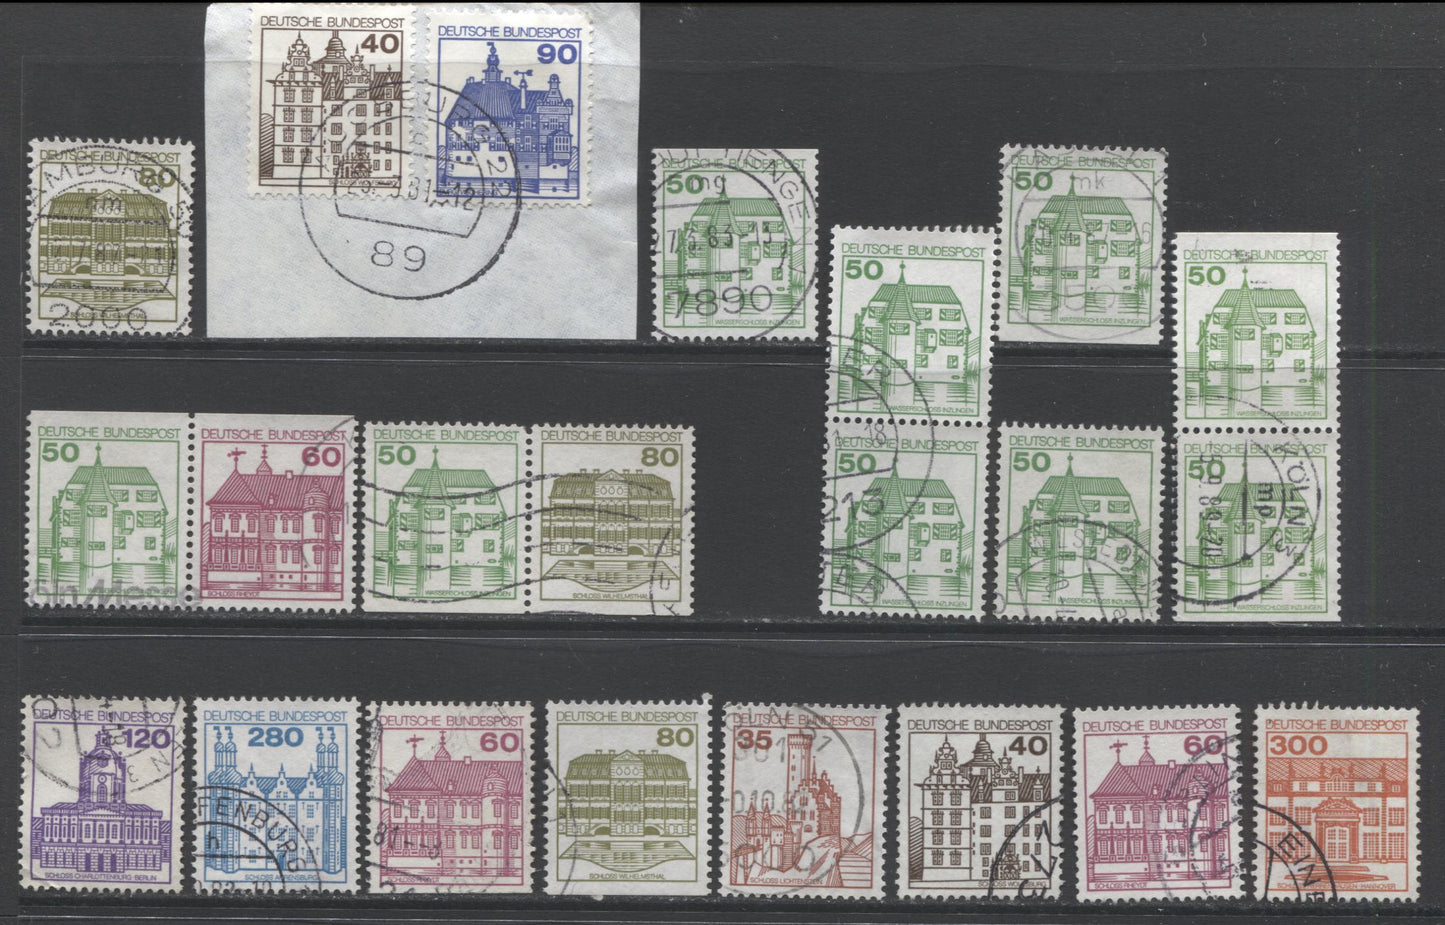 Lot 89 Germany SC#1239/1340 1977-1980 Commemoratives & Definitives, A VF Used Range Of Sheet & Booklet Singles, 2017 Scott Cat. $14.95 USD, Click on Listing to See ALL Pictures